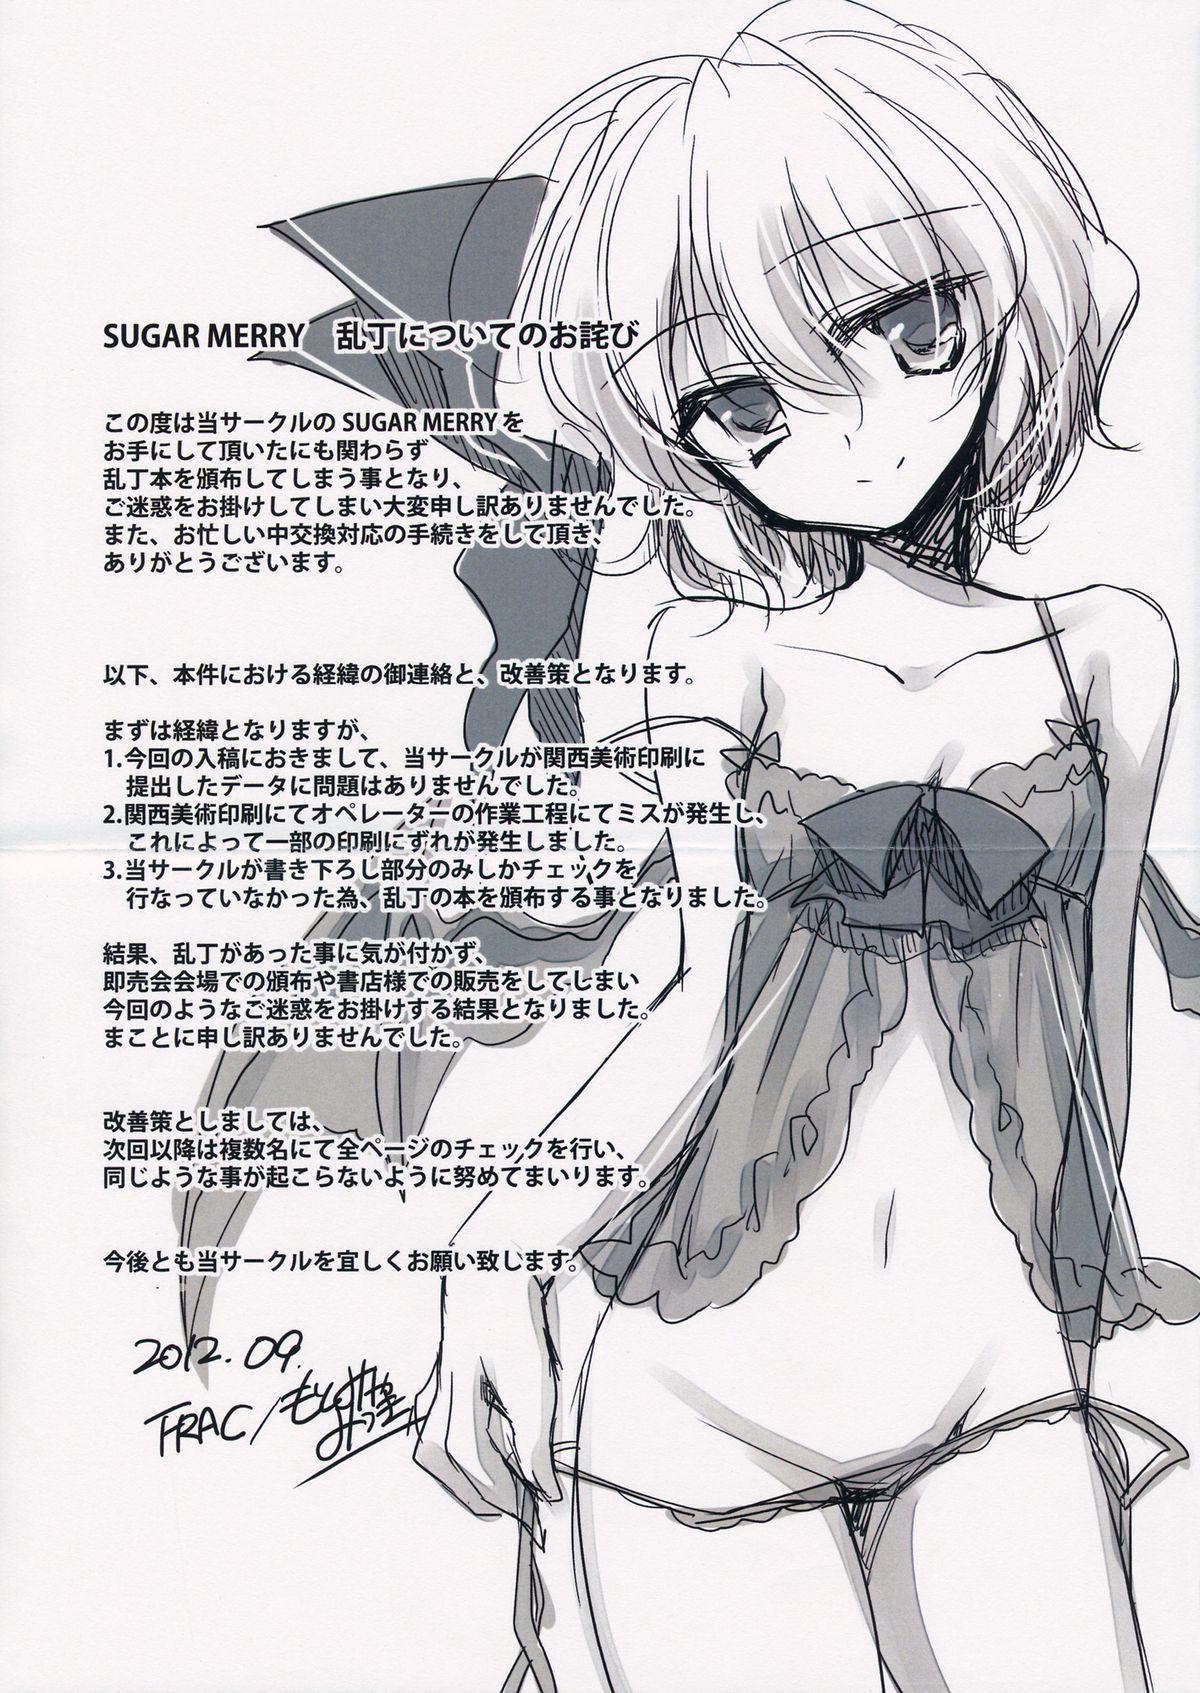 Adult SUGARMERRY - Touhou project Perfect Body - Page 2